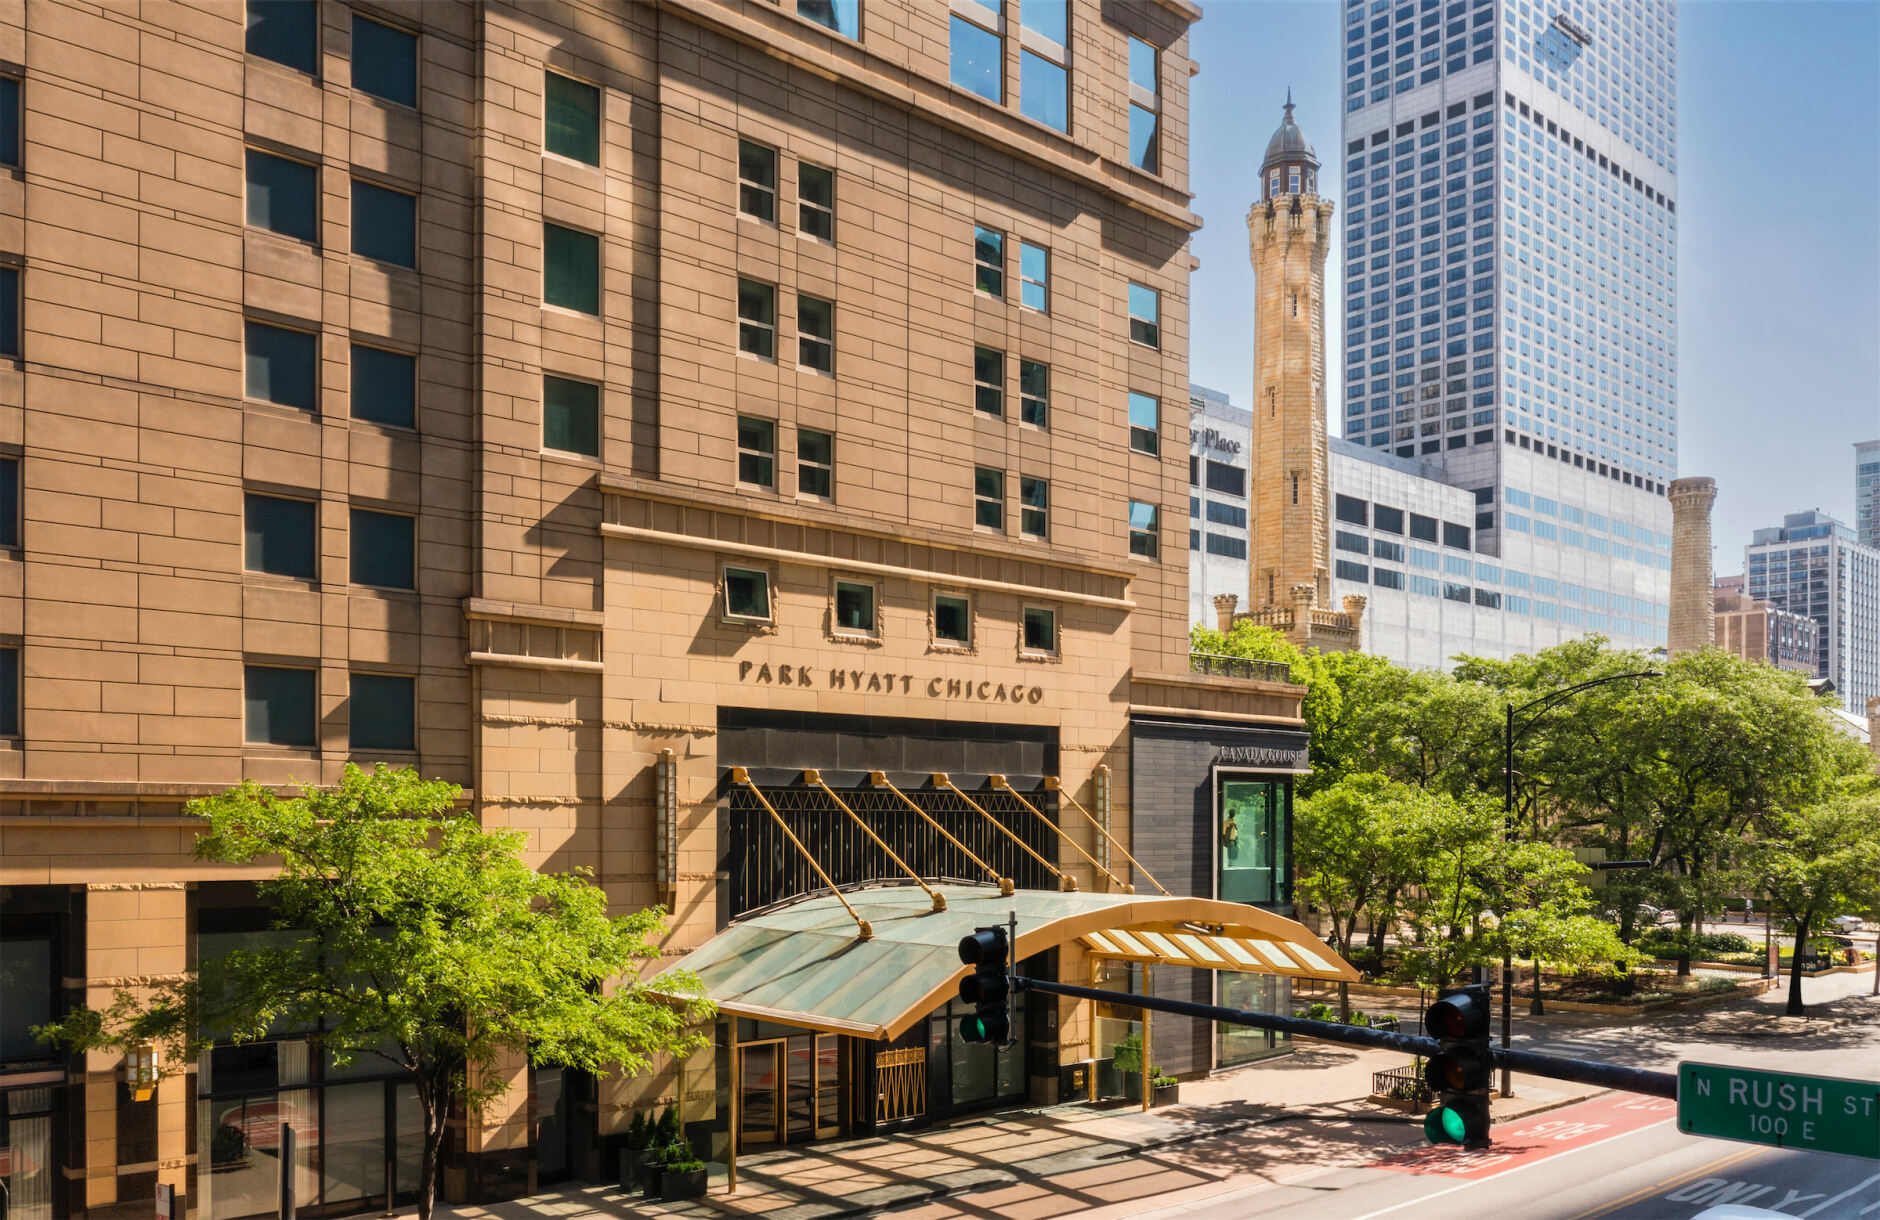 ROH New Hotel Openings: Exterior view of the Park Hyatt Chicago